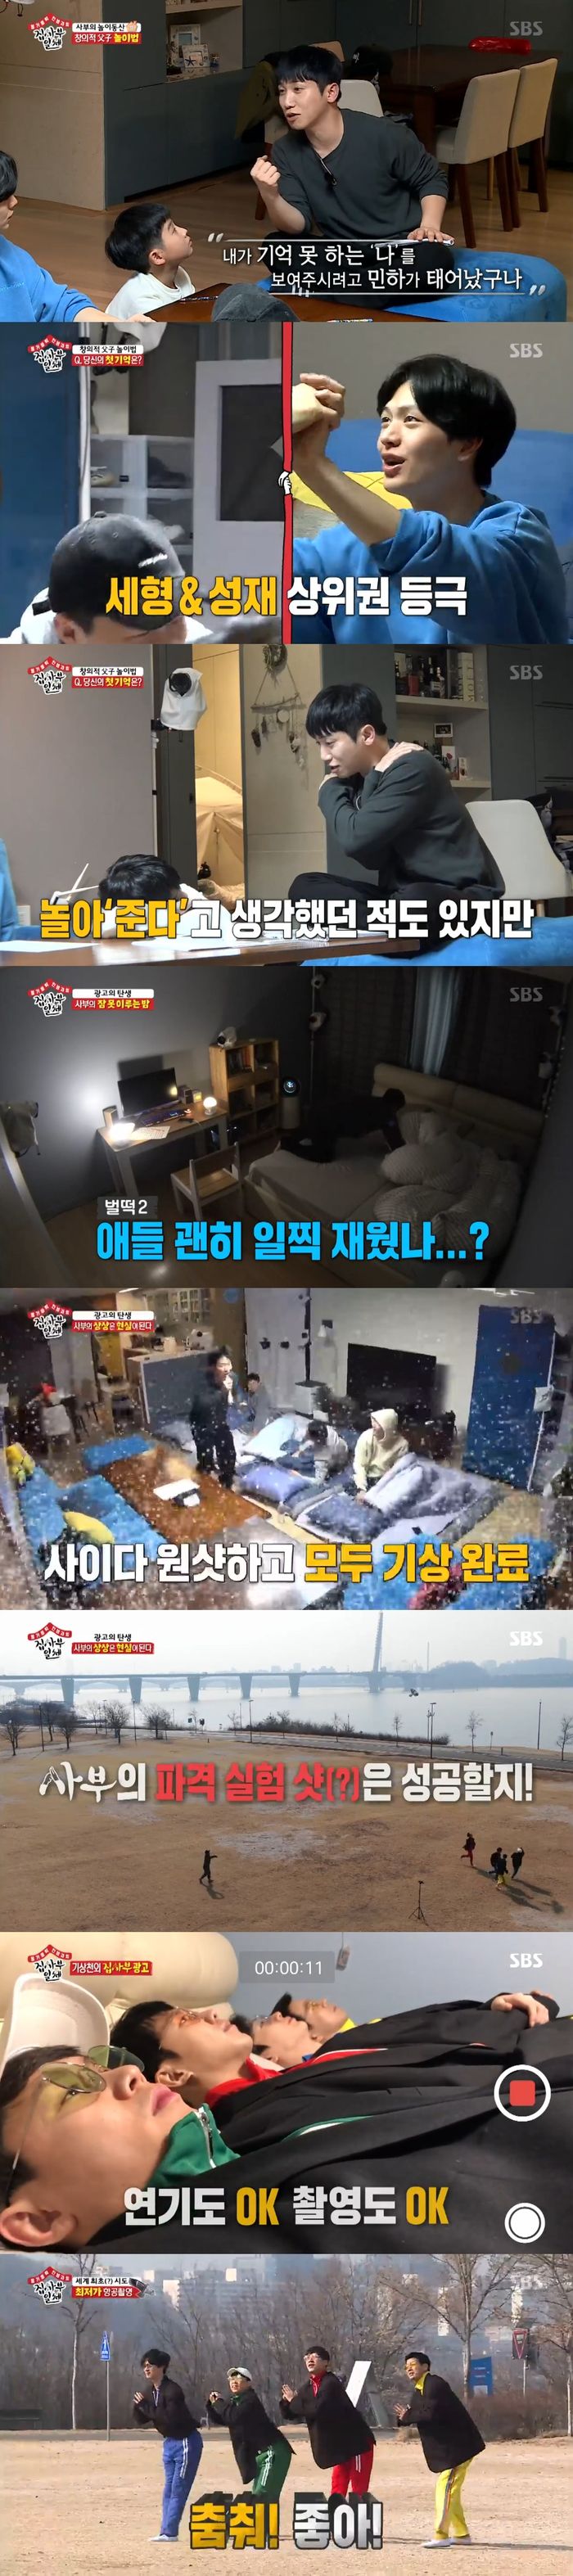 The CM song advertisement was completed.On SBS All The Butlers broadcasted on the 3rd, all The Butlers members who take CM song video at the house of Master Yoo Se-yoon were drawn.On this day, the members of All The Butlers headed to the house of Master Yoo Se-yoon, and when they saw the creativity notes they found there, they suggested, Lets try it, too.Yoo Se-yoon handed the paper and pencil to the members and asked, What is the first memory you are born and remember?The members began to write down the answer with a hard time.Yuko Fueki heard the first memory of All The Butlers members and picked Lee Seung-gi as the top.And Lee Seung-gi showed a great sense of entertainment despite being 11 years old.Yuko Fueki said, It is fun to play with my dad more than TV or YouTube.My life started to feel comfortable when I started playing with Minha, said Yoo Se-yoon. It was really fun because I was playing with Minha, not playing.On the other hand, Master Yoo Se-yoon and members once again listened to the CM song recorded earlier.Lee Seung-gi suggested that the song is so good that I think the video should be taken out of power.OK, today is the day when the idea does not come out, we have to put it down, said Yoo Se-yoon, who heard the word. In fact, I am doing my best in my head.The next day, Yoo Se-yoon woke up the members by singing Norazos cider.I am going to shoot the video today, but I am going to shoot it in the space that gave me the most inspiration, he said.I will take a kite shot at the end, I do not know if it is possible because I have never done it, said Yoo Se-yoon.In addition, Yoo Se-yoon has released a costume that was rushed to the air. It is a harmony of the sense of heterogeneity that I emphasize.After filming throughout the Yoo Se-yoons home, the members went out to Han River Park for a kite shot; they ran around, flying kites in the wind.Yoo Se-yoon also played with the members and directed Dancing.Im honestly overflowing, said Yoo Se-yoon, and I can get to the teaser.Lee Seung-gi asked, When does the edit come out? Yoo Se-yoon laughed, saying, I will send you the edit in 40 minutes.A few days later, All The Butlers members received a final version of the ad video from Yoo Se-yoon.The members showed 100% customer satisfaction by seeing the advertisement video and laughing at the stretch.